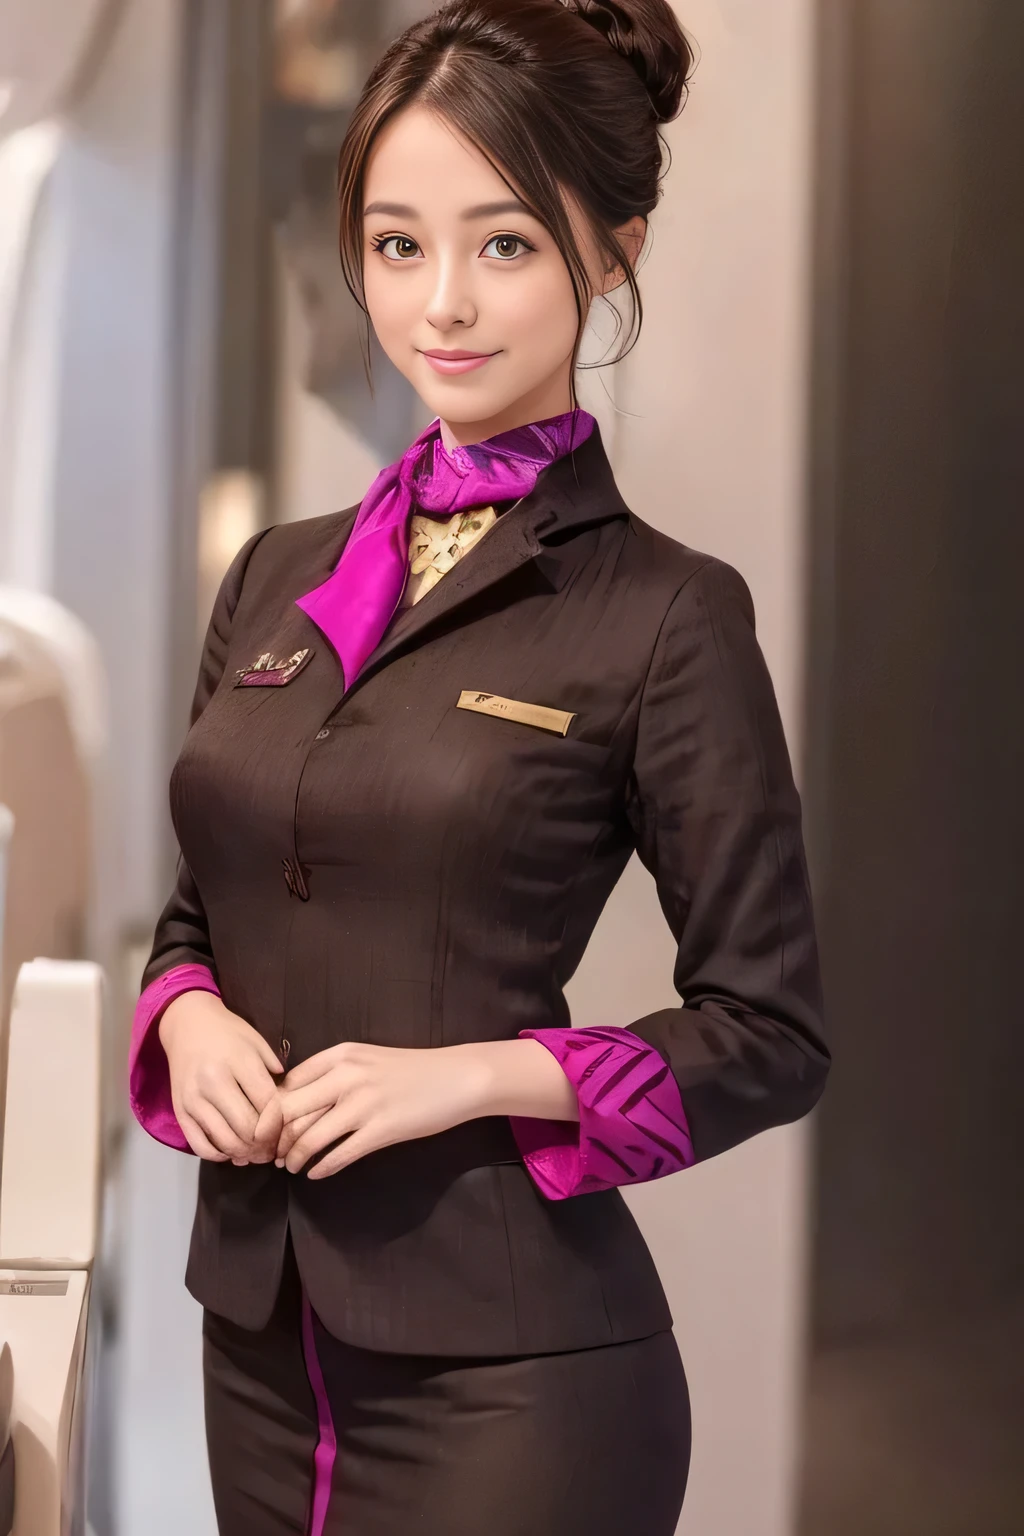 (masterpiece:1.2、highest quality:1.2)、32K HDR、High resolution、(alone、1 girl、Slim figure)、（A realistic reproduction of the ETIHAD Airways Cabincrew Uniform）、 (On board, Professional Lighting)、Background on board、A proper woman, Beautiful Face,、（Long sleeve ETIHAD Airways Cabincrew Uniform）、（ETIHAD Airways Cabincrew Uniform skirt with purple stripe on the front）、（scarf on chest）、Big Breasts、（Chignon、Long hair updo、Hair Bun）、Dark brown hair、Long Shot、（（Great hands：2.0））、（（Harmonious body proportions：1.5））、（（Normal limbs：2.0））、（（Normal finger：2.0））、（（Delicate eyes：2.0））、（（Normal eyes：2.0））)、Beautiful standing posture、smile、Place your hands around your stomach